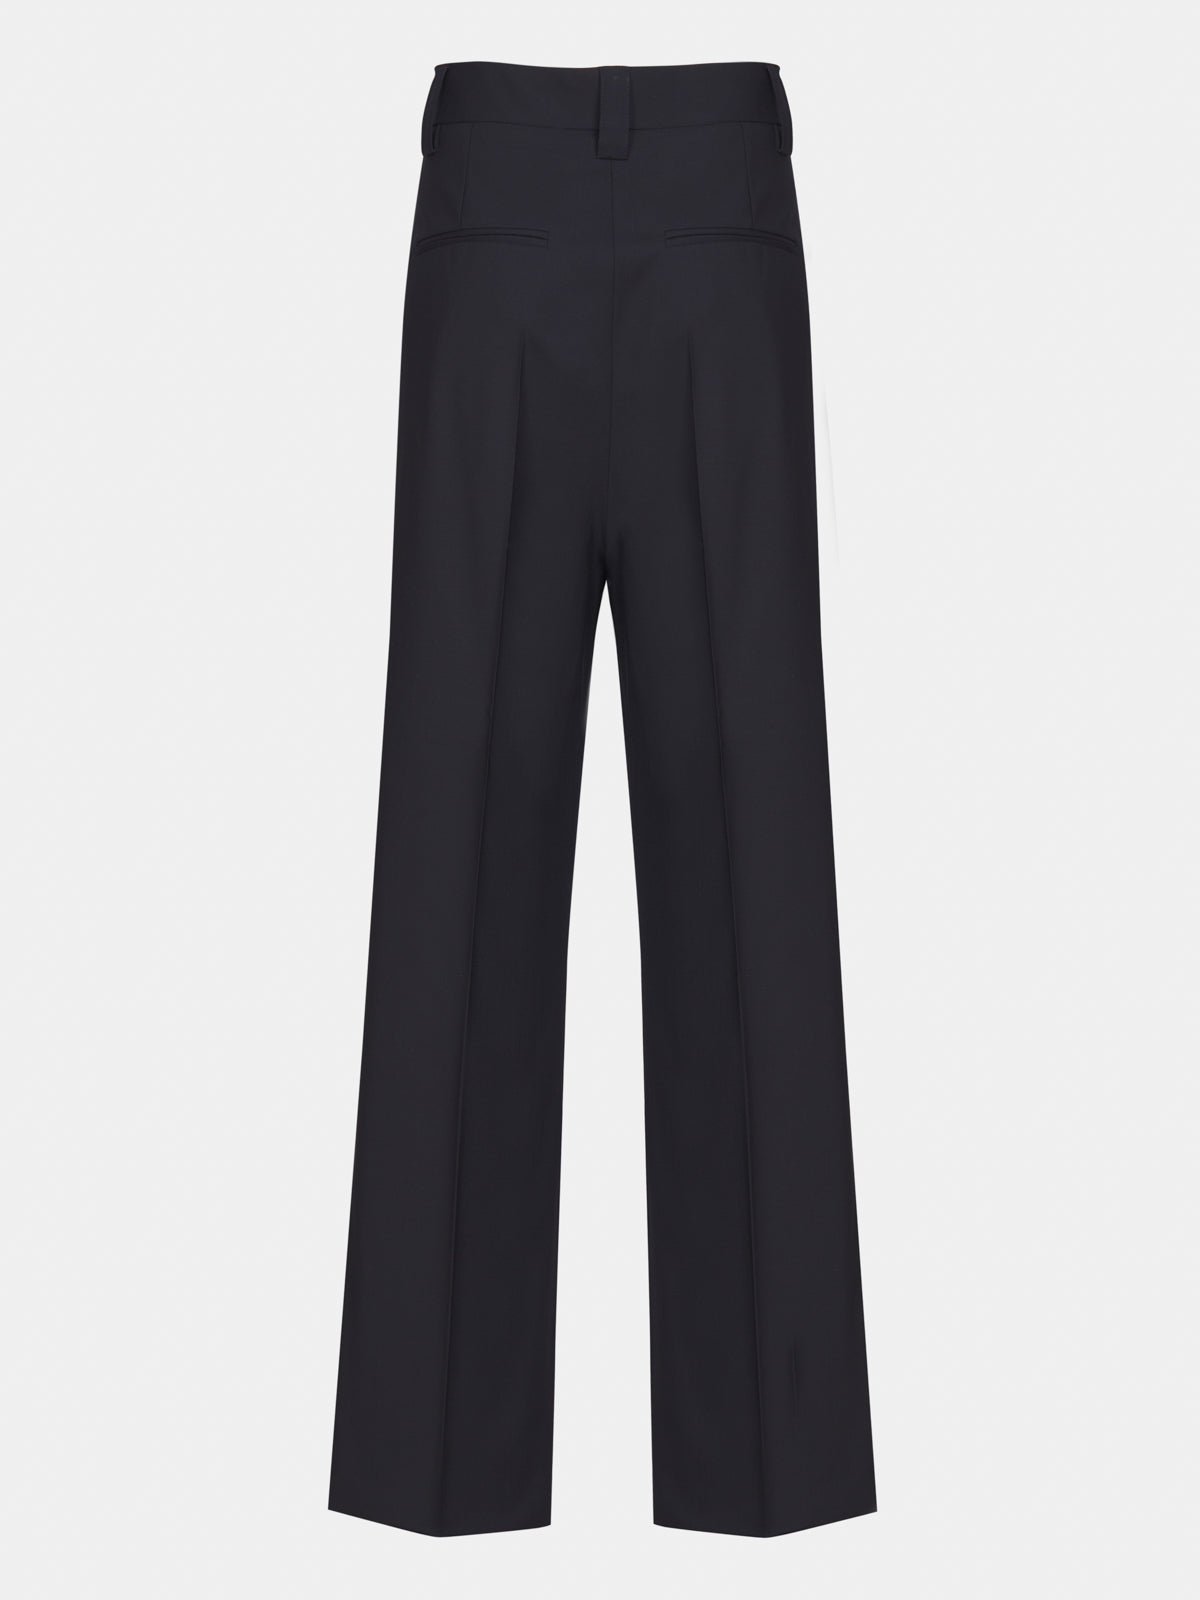 Navy blue cool wool trousers with double pleats